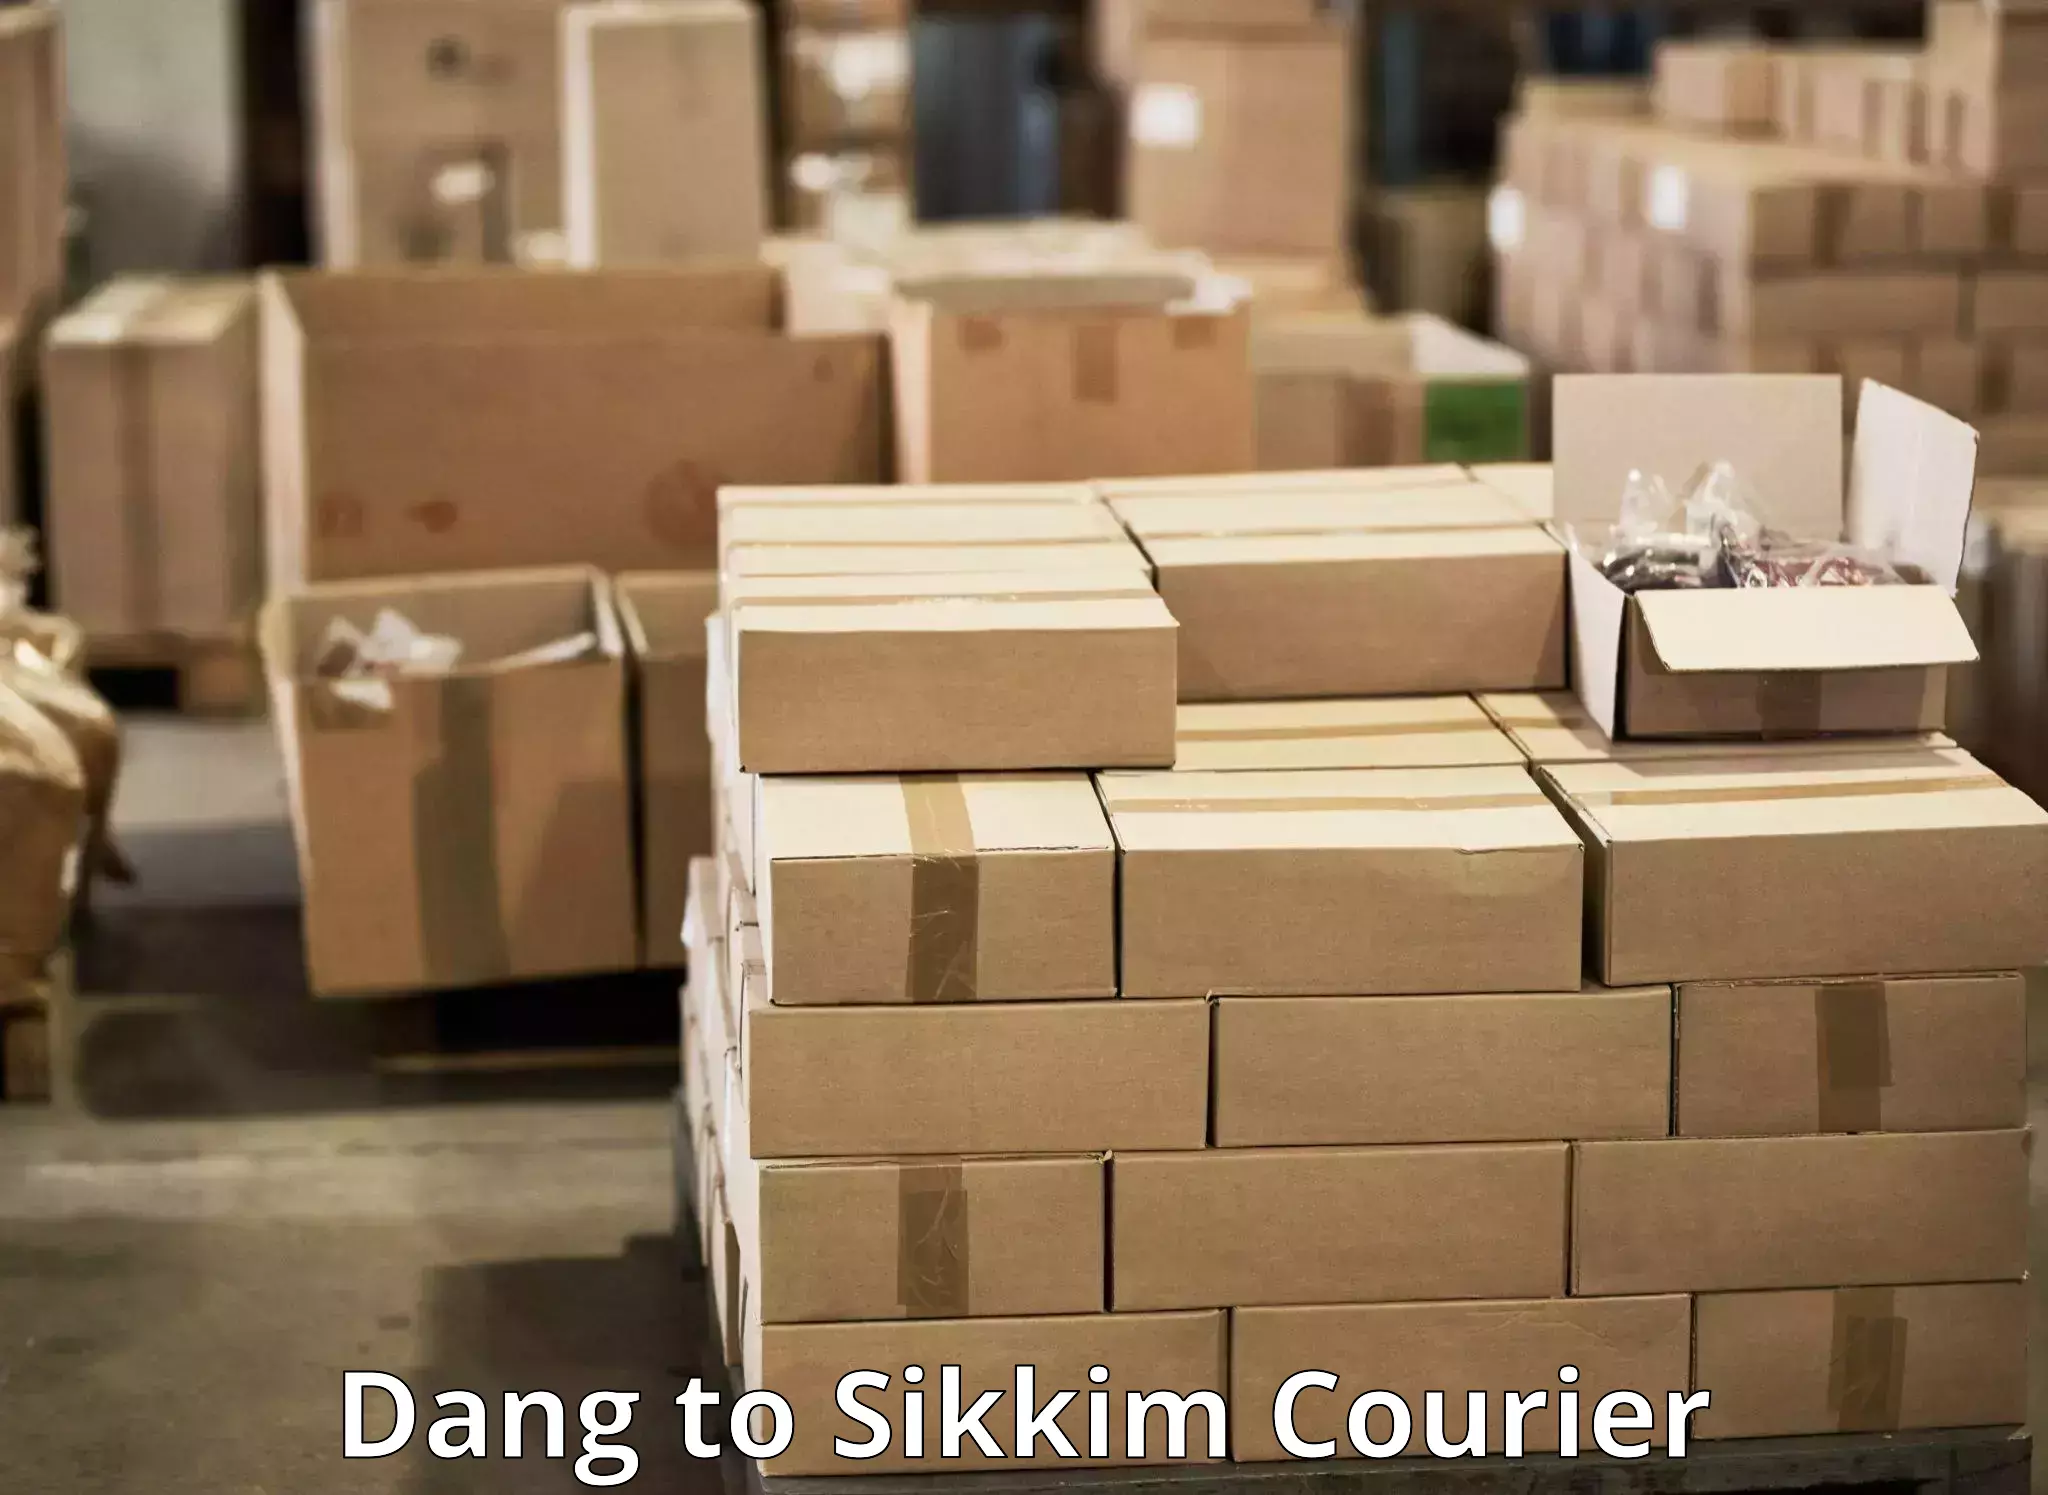 Global courier networks Dang to Sikkim